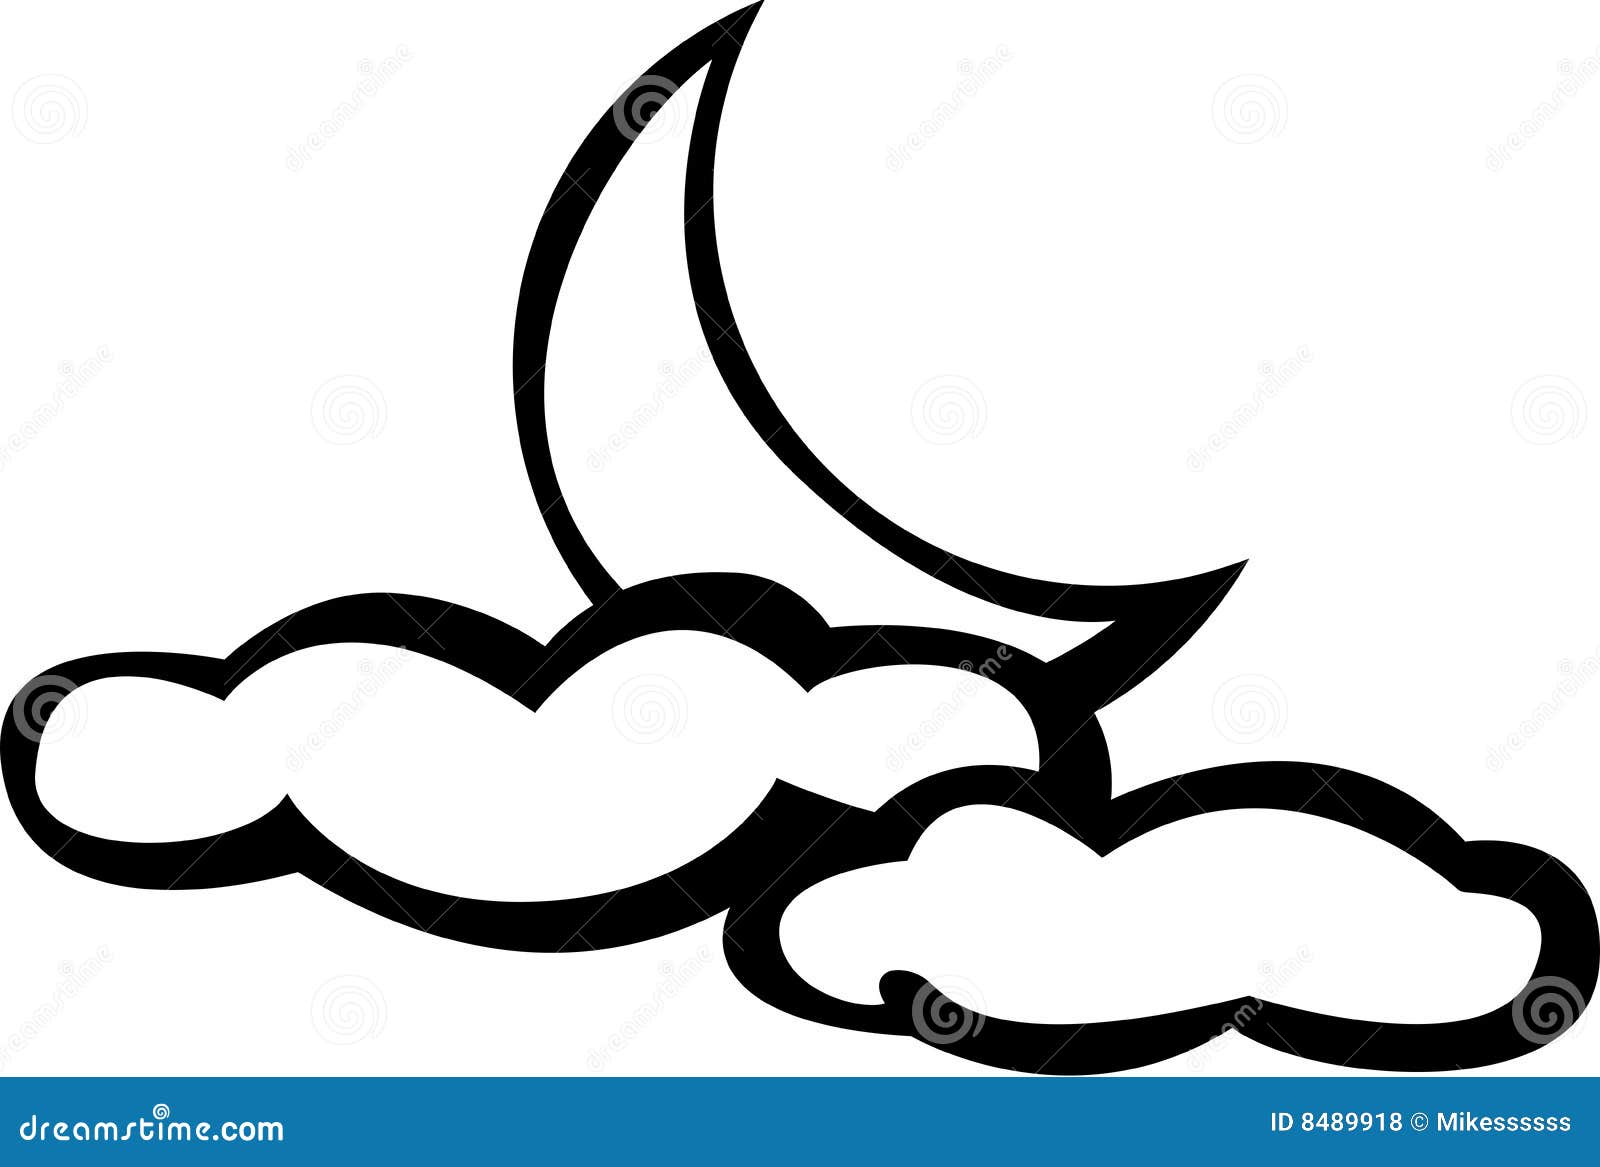 clipart of someone mooning - photo #41